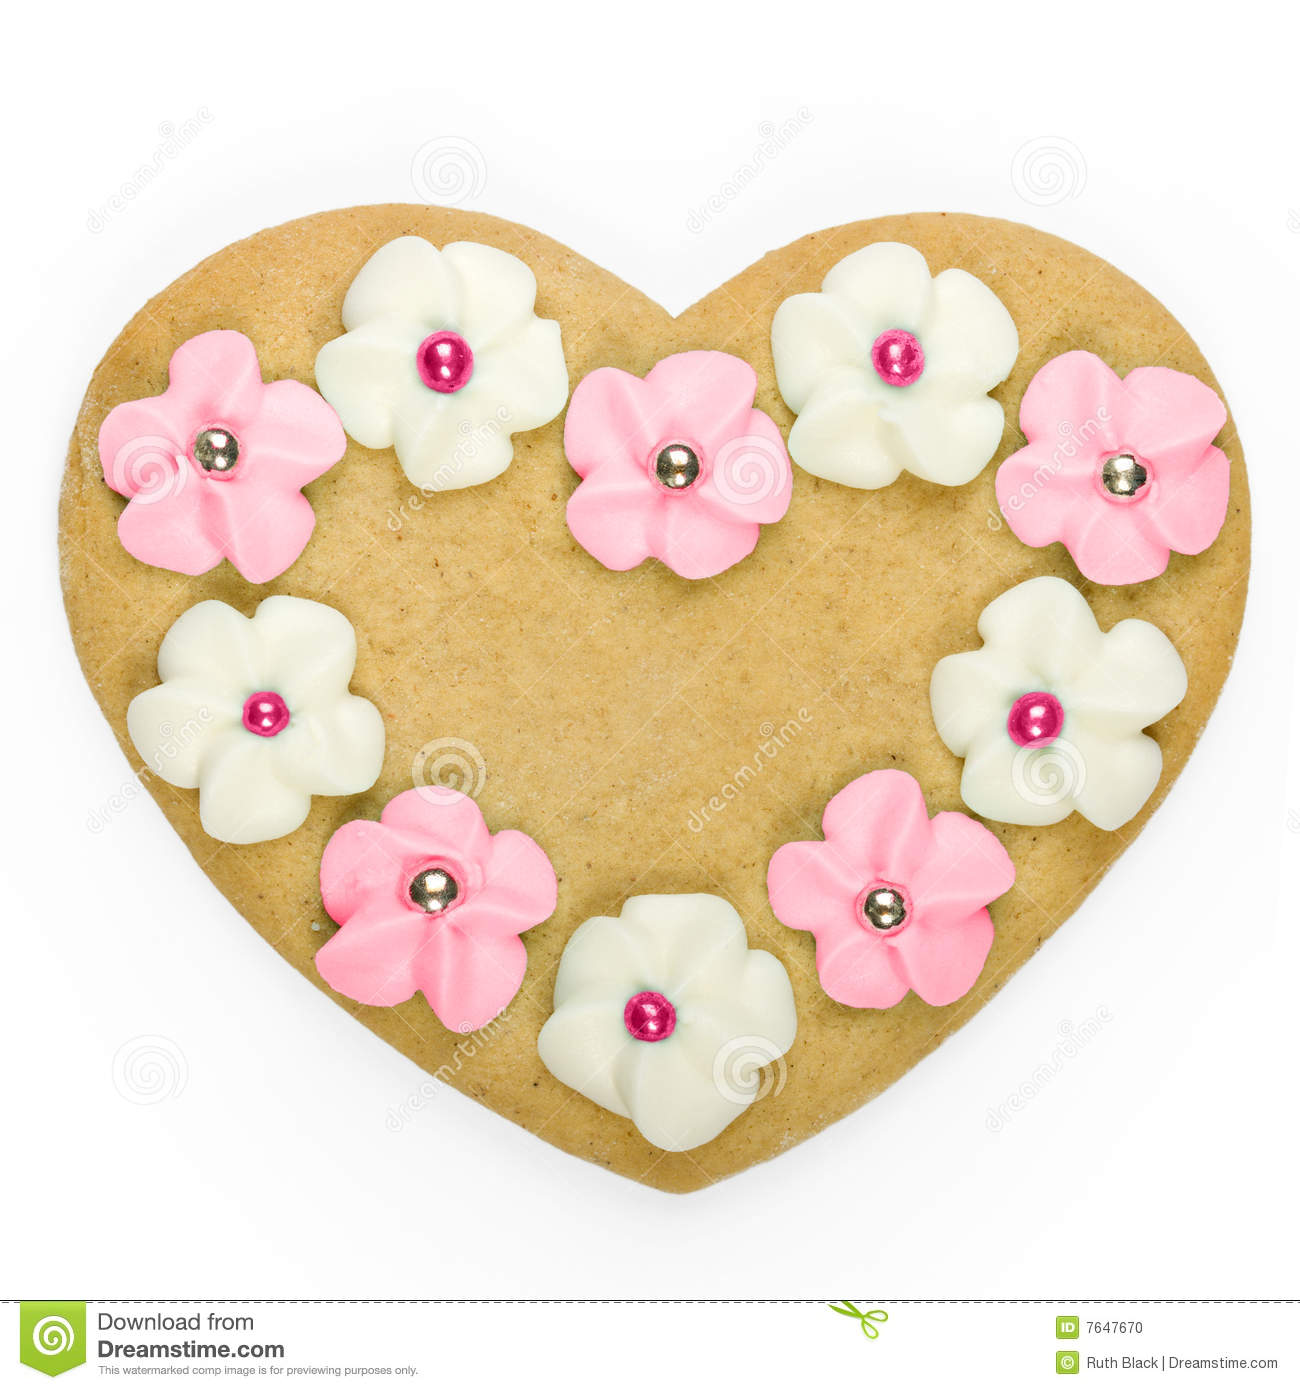 Heart Shaped Gingerbread Cookie Decorated With Sugar Flowers